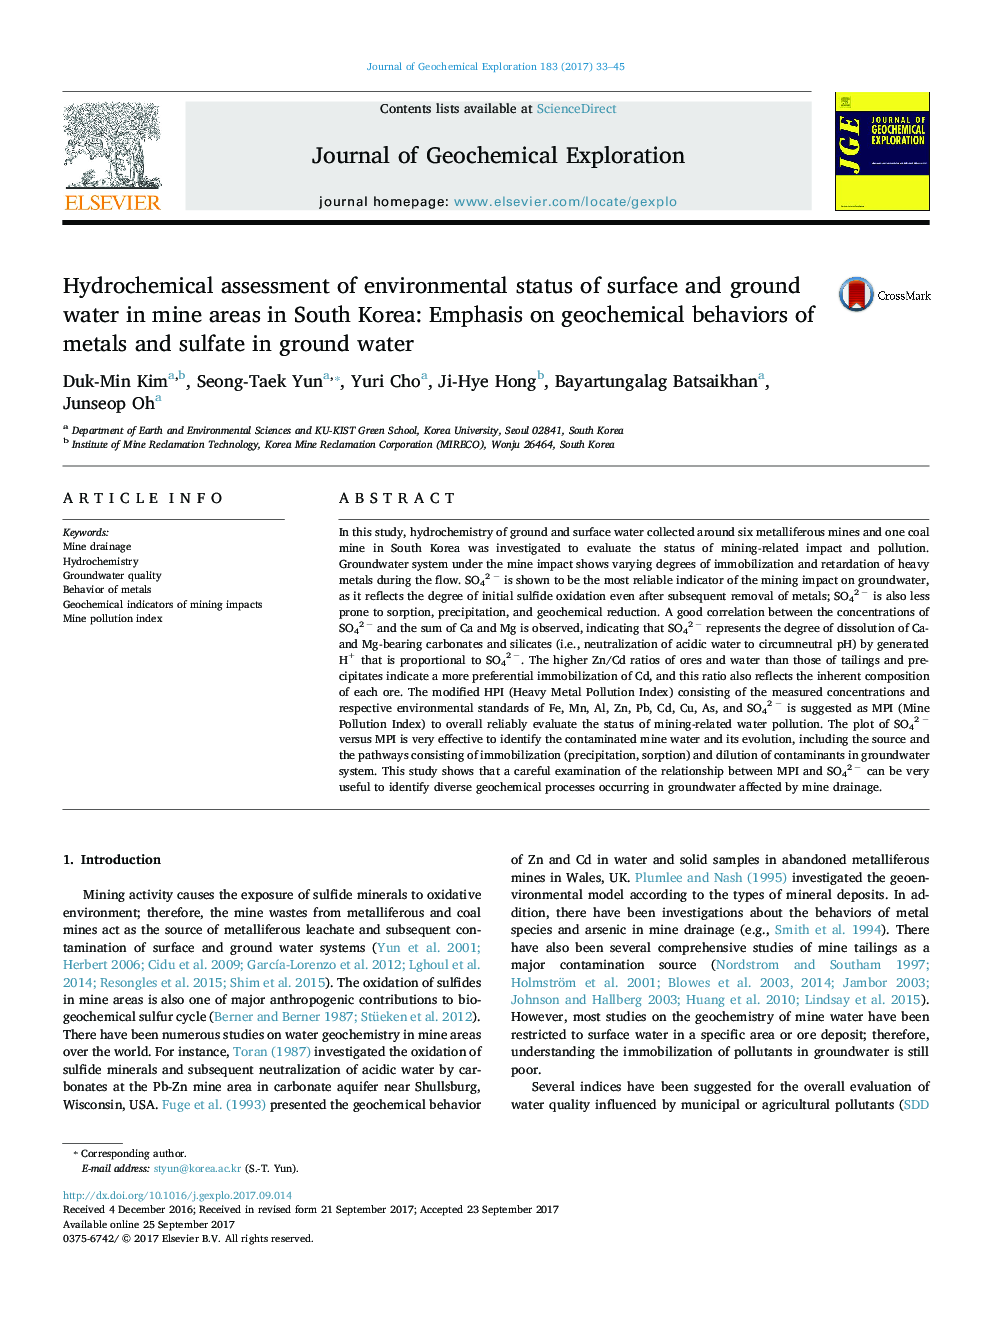 Hydrochemical assessment of environmental status of surface and ground water in mine areas in South Korea: Emphasis on geochemical behaviors of metals and sulfate in ground water